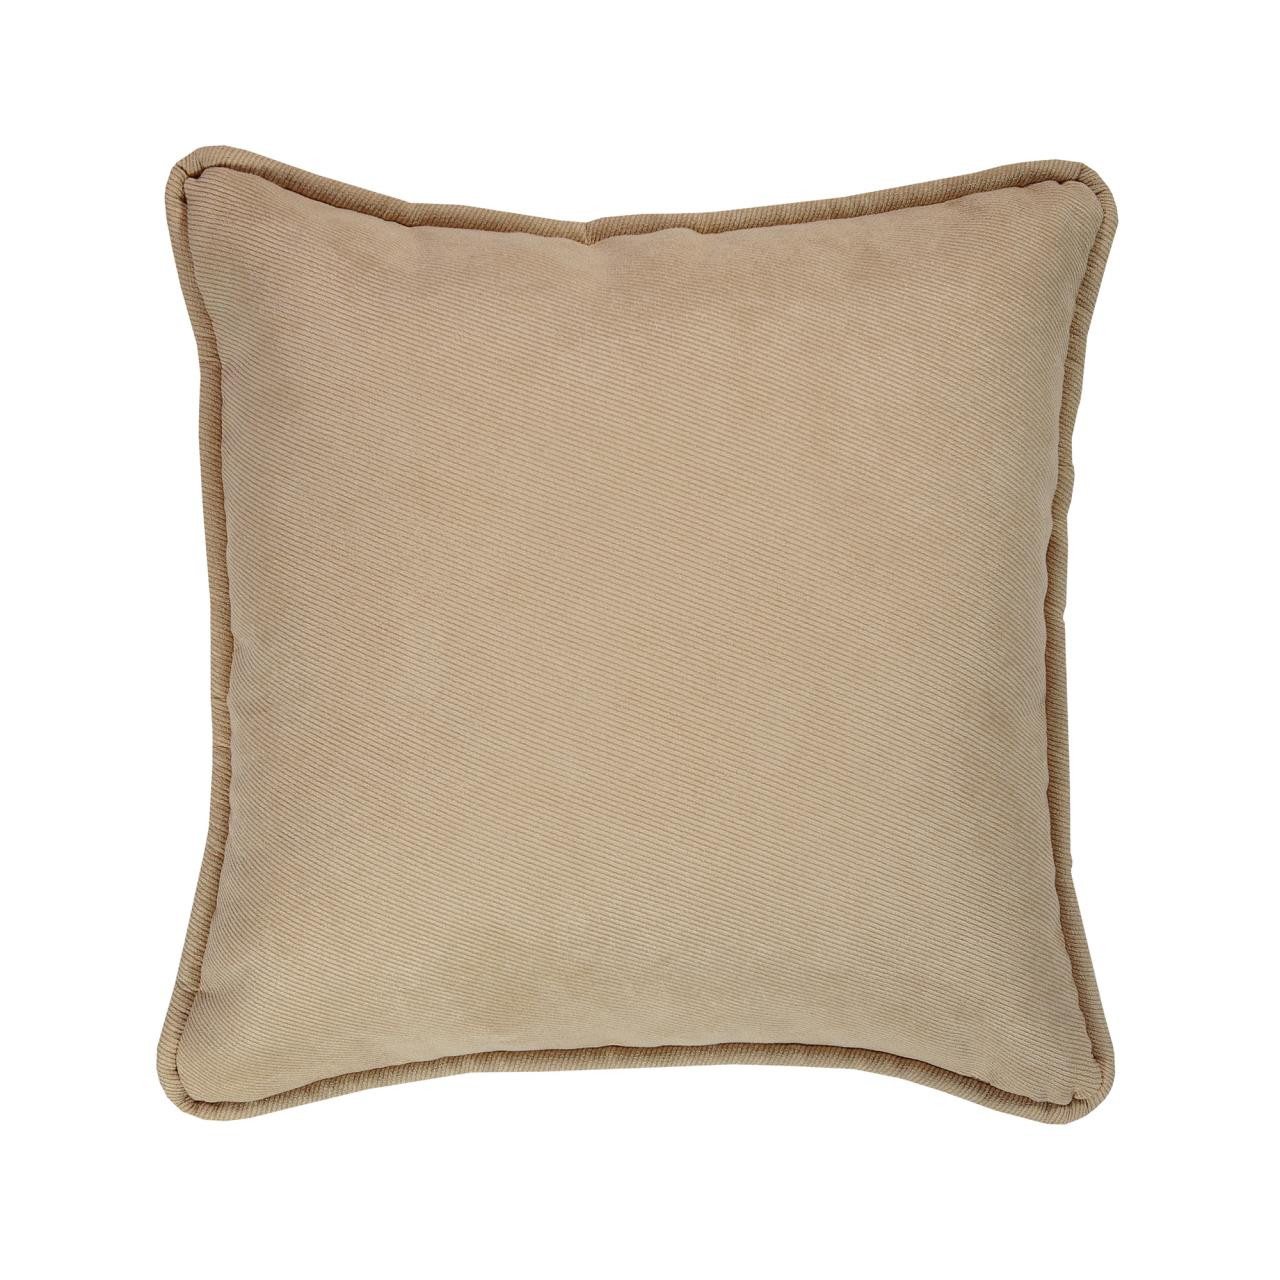 Virginia Wheat Square Pillow by Thomasville | Paul's Home Fashions